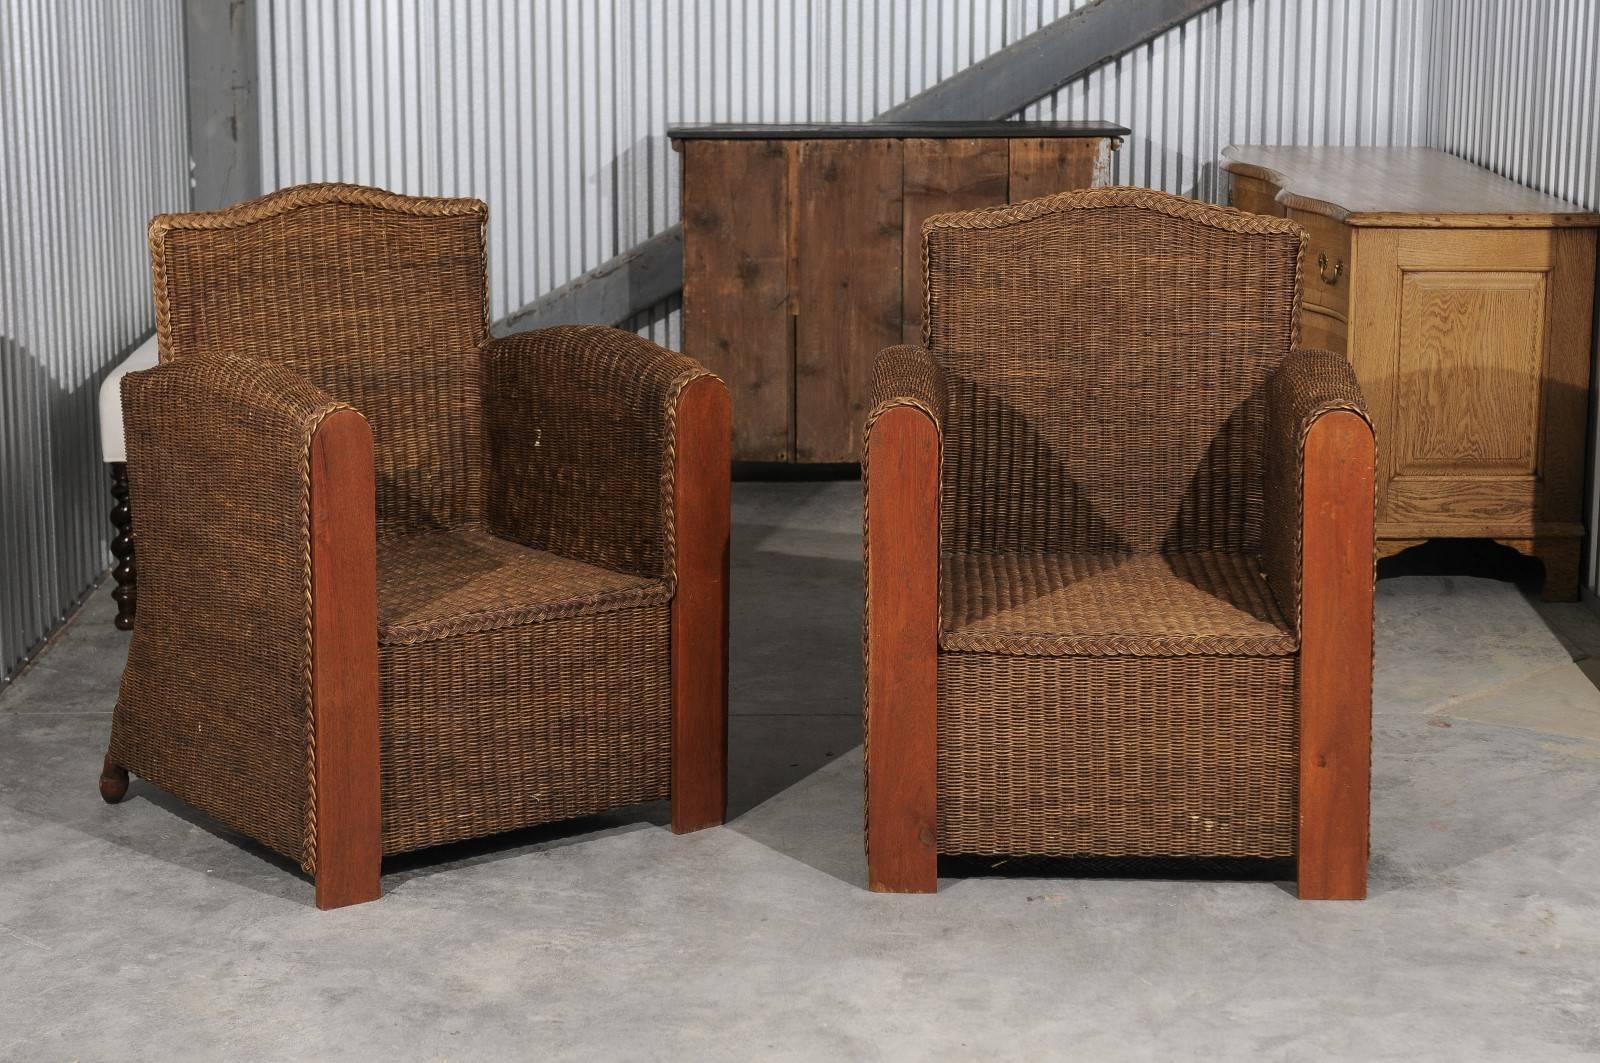 A pair of French vintage wicker and wood club chairs from the mid-20th century. Featuring a wicker body with wooden arm supports, each chair is adorned with a straight camel back. The tall straight arms provide a greater sense of privacy and the